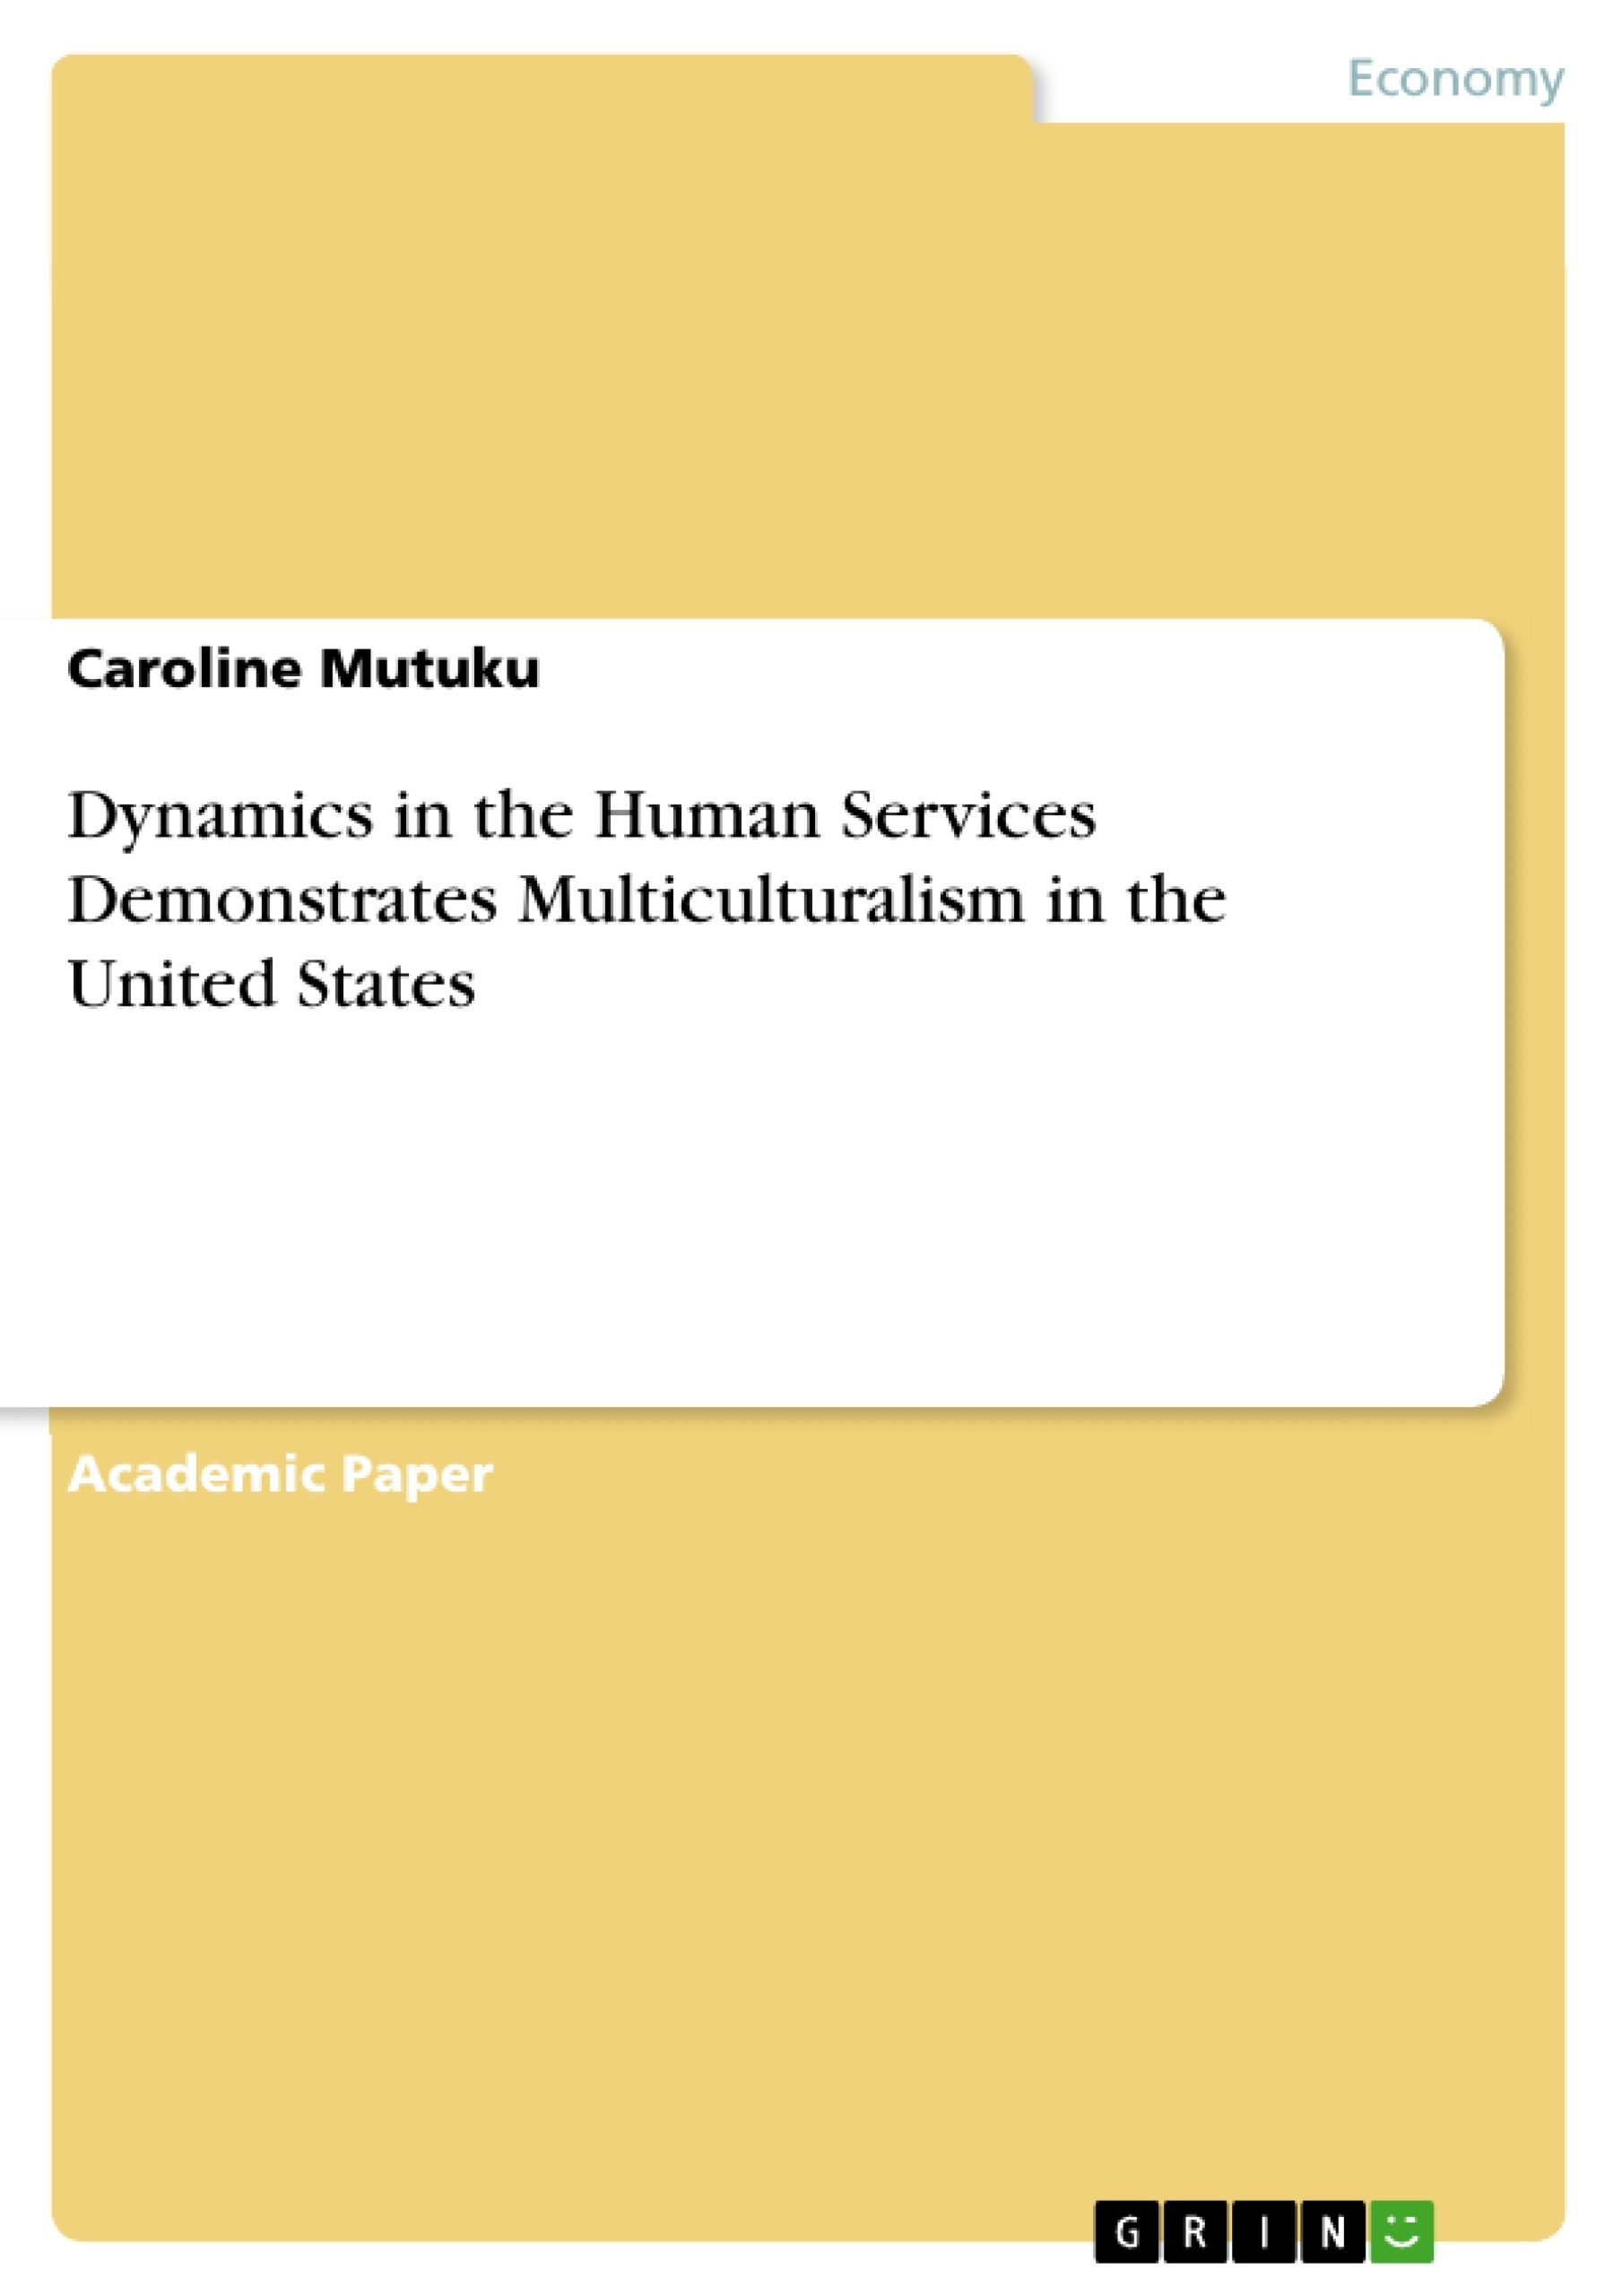 Título: Dynamics in the Human Services Demonstrates Multiculturalism in the United States